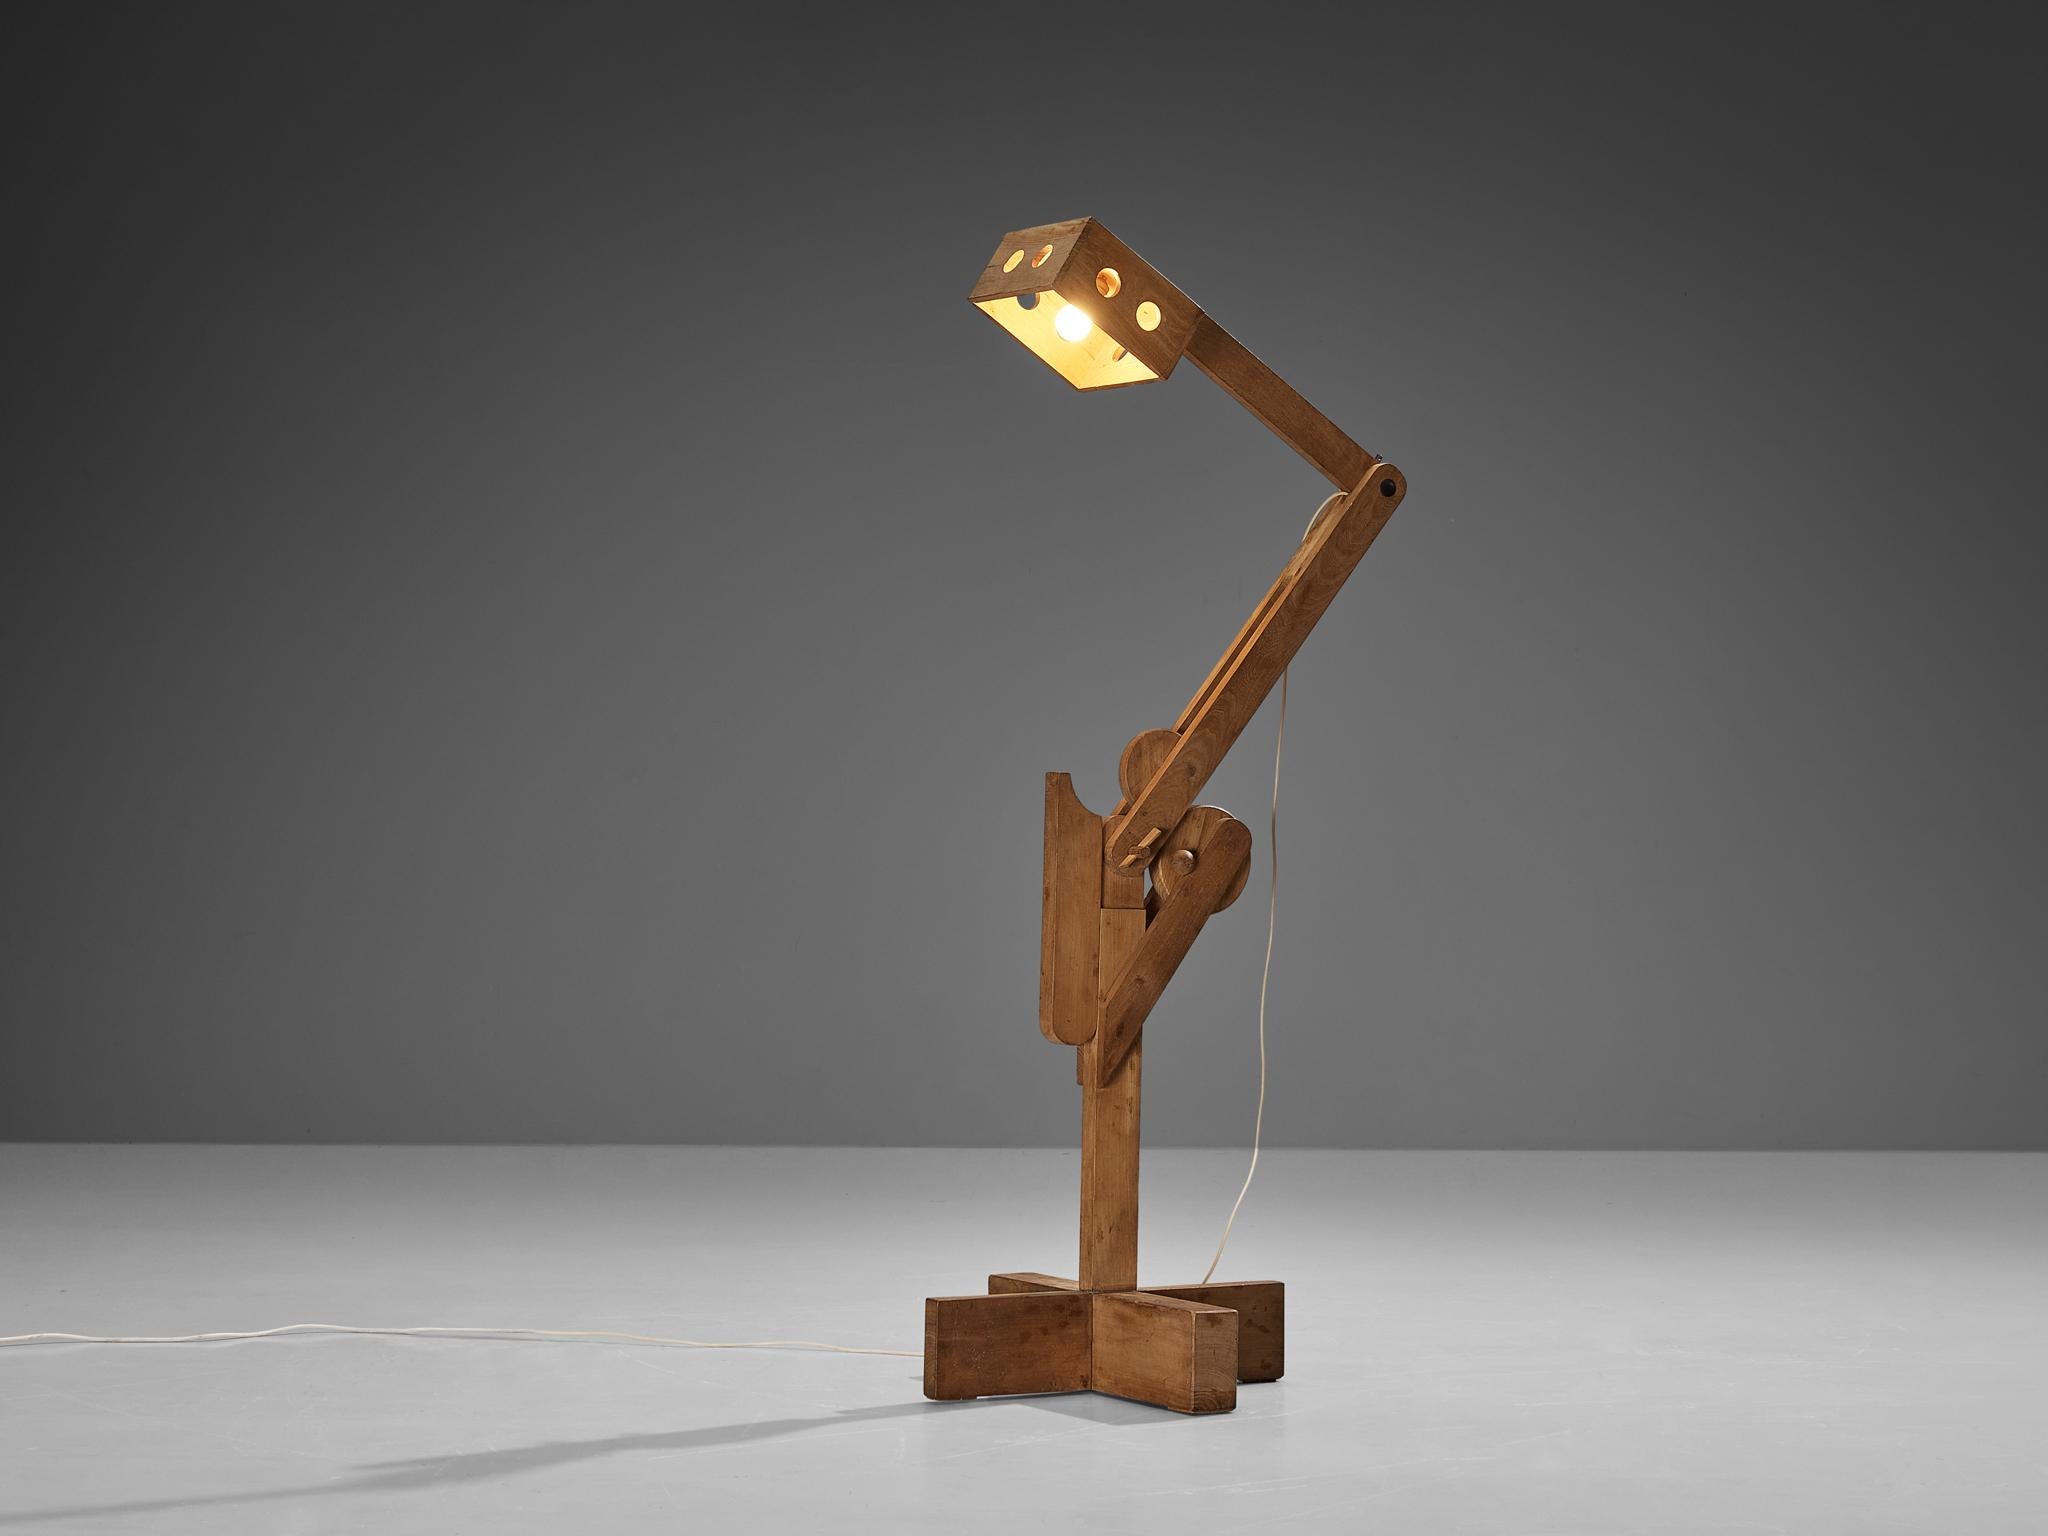 Pietro Cascella, Pinocchio floor lamp, no. 438/500, chestnut, Italy, 1972

Pietro Cascella (1921-2008) held the distinguished title of Italy's foremost monumental marble sculptor, renowned for his semi-abstract style. This lamp holds a distinctive